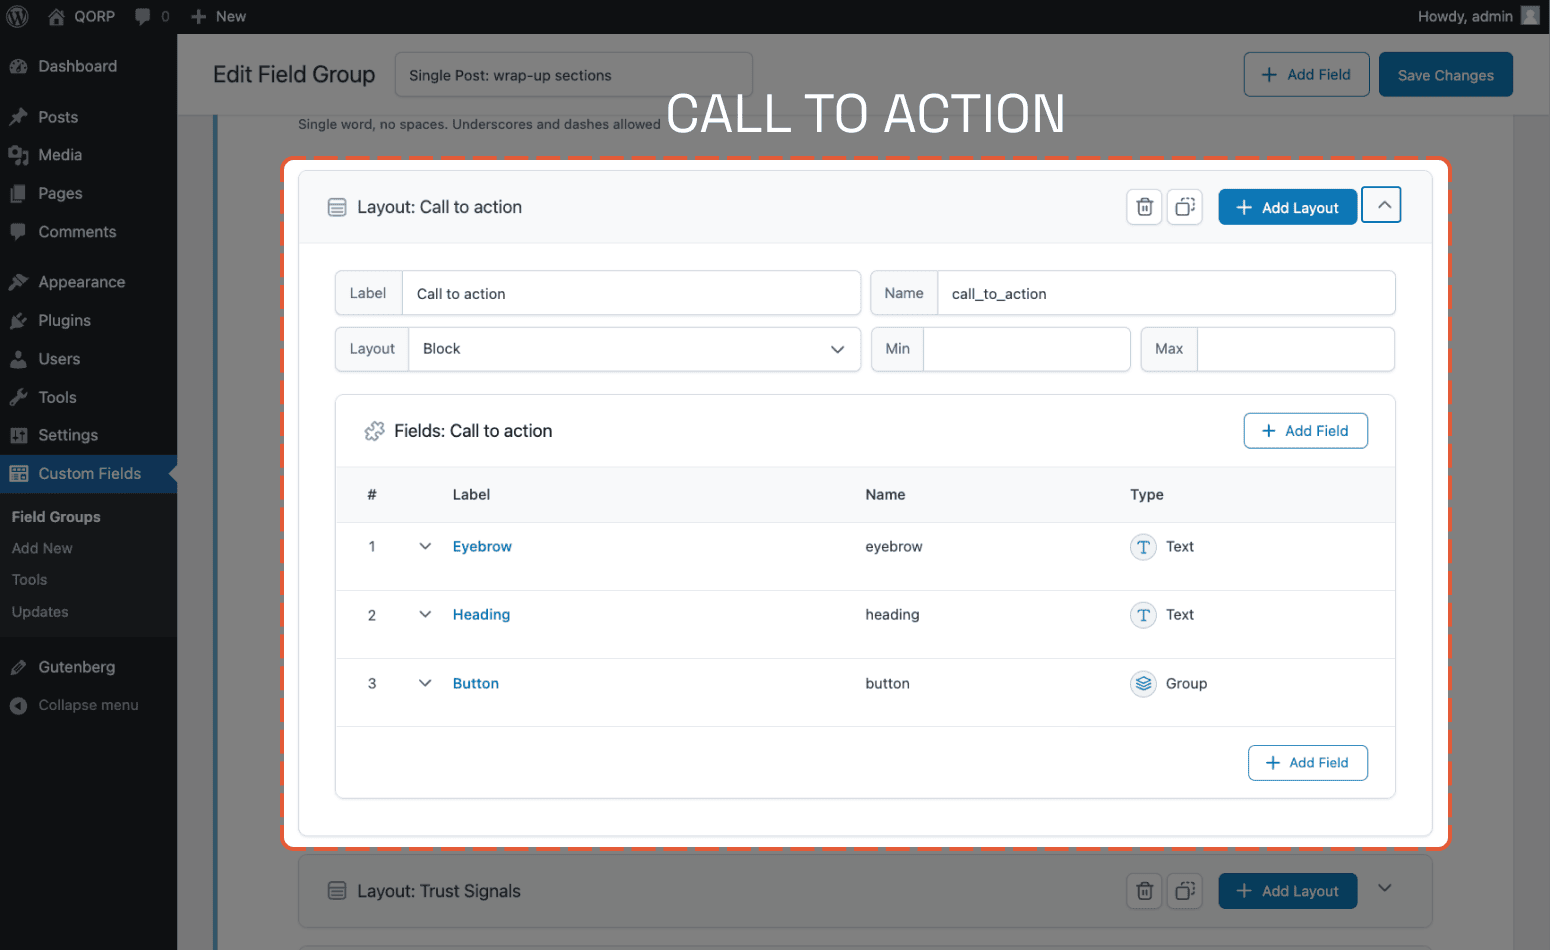 Flexible Content subfields for Call to Action section.